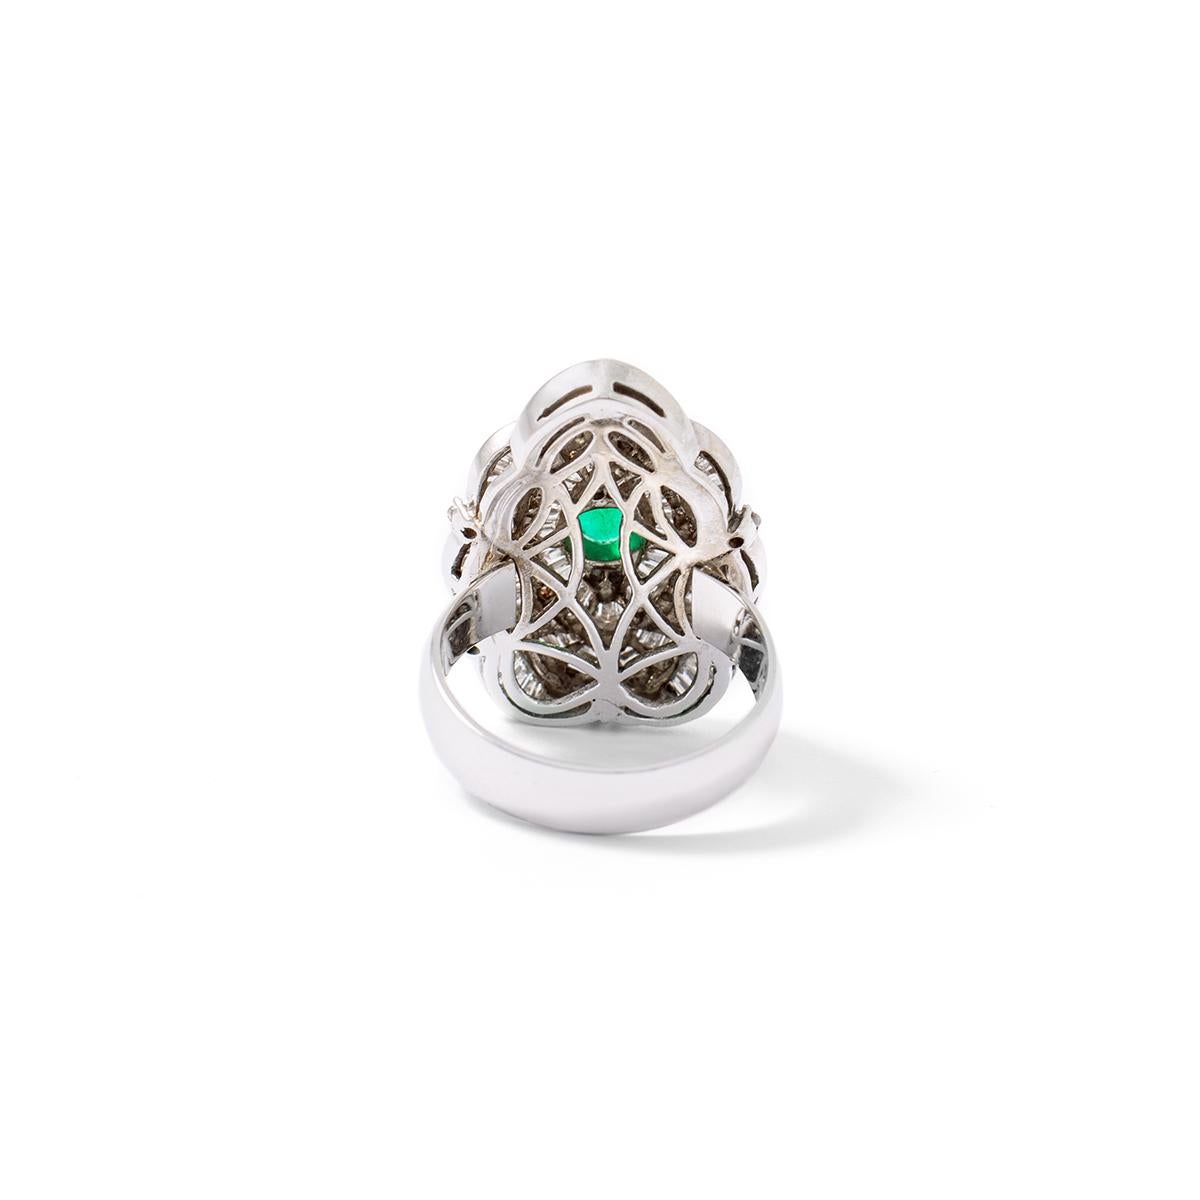 0.98 carat Natural Colombian Emerald mounted on a Diamond pave white gold Ring.
